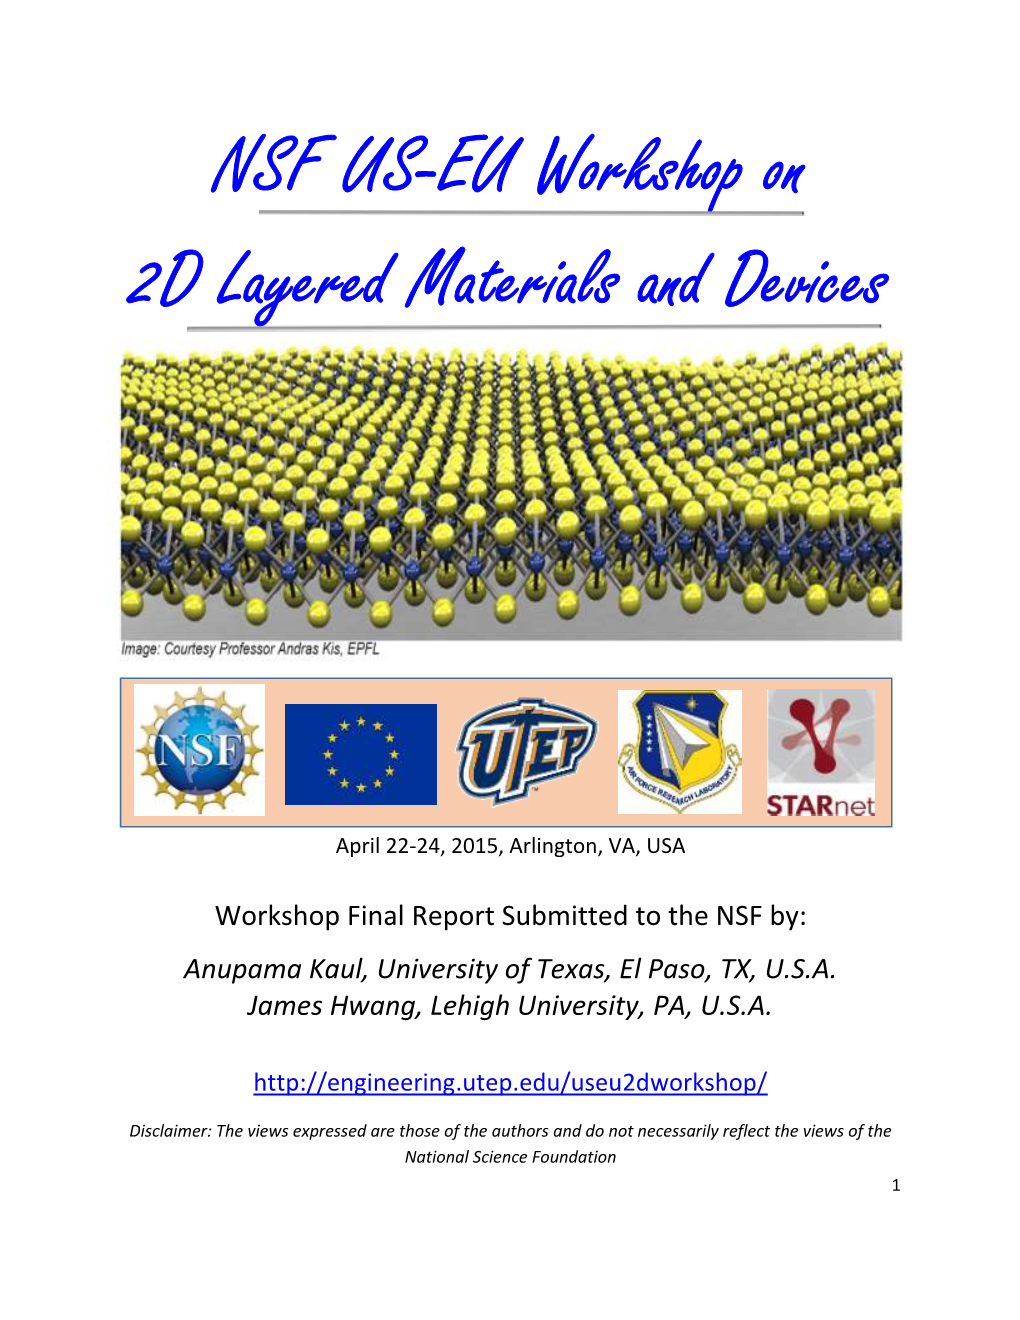 NSF US-EU Workshop on 2D Layered Materials and Devices